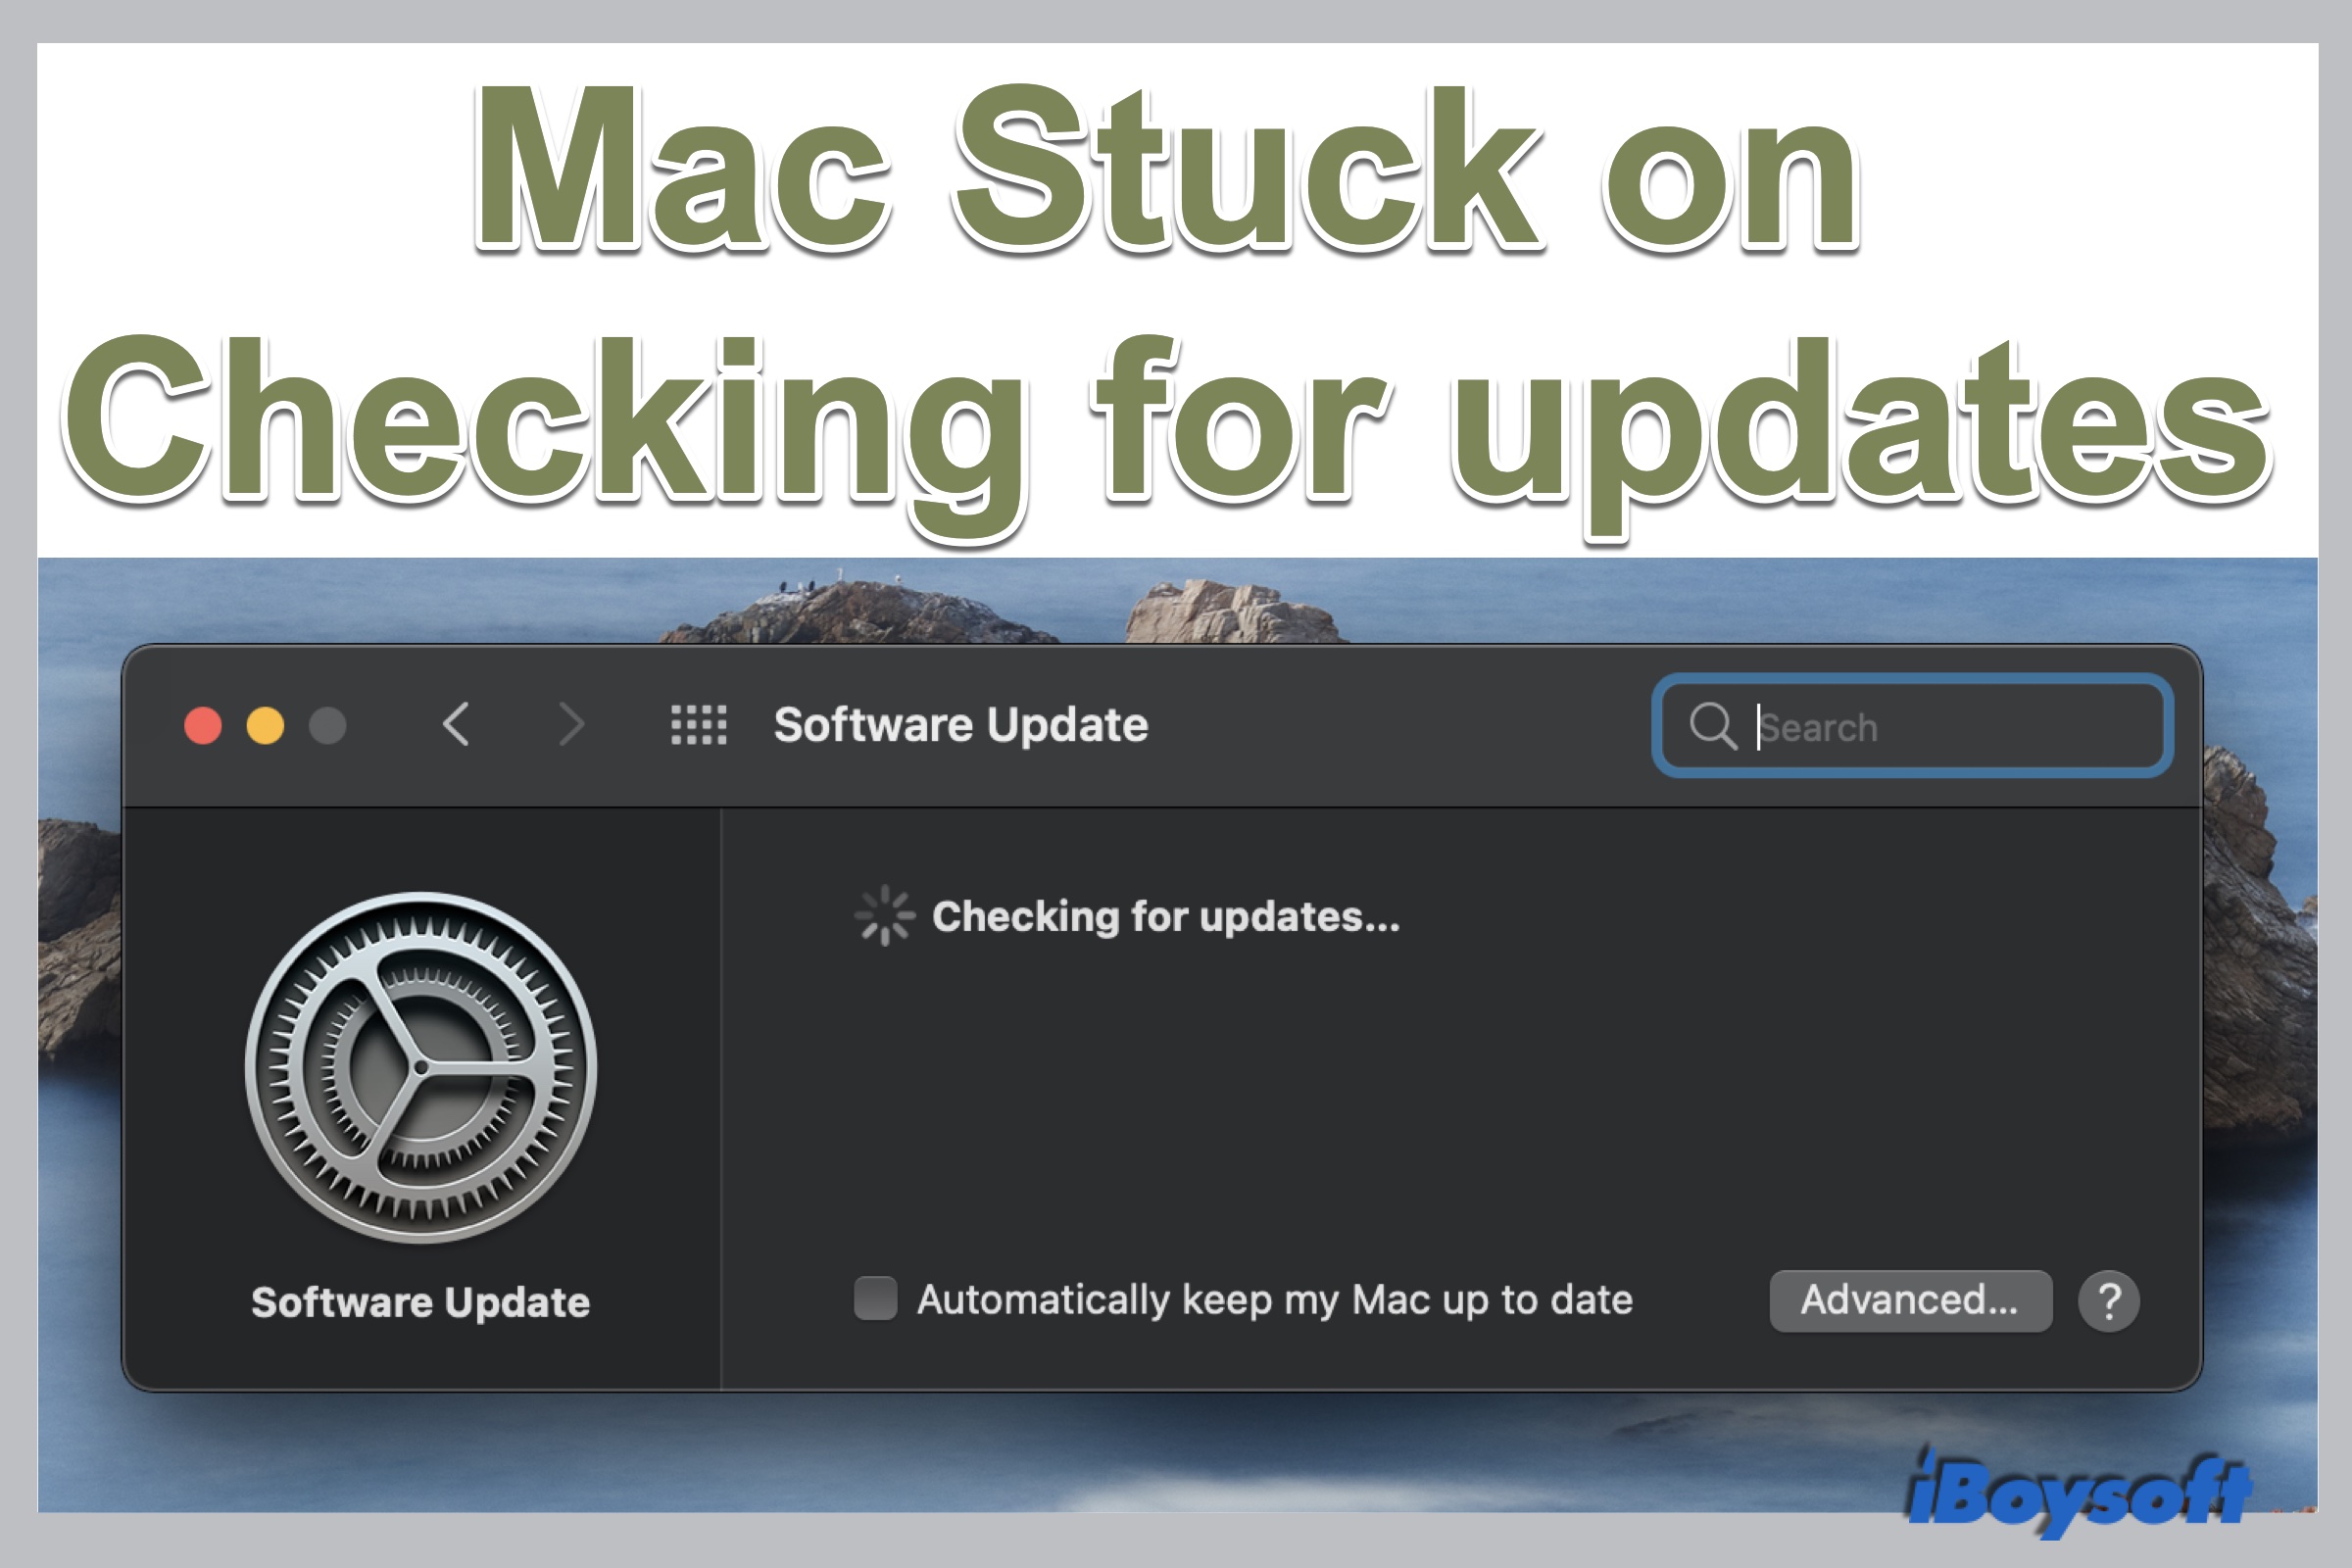 Mac stuck on Checking for updates